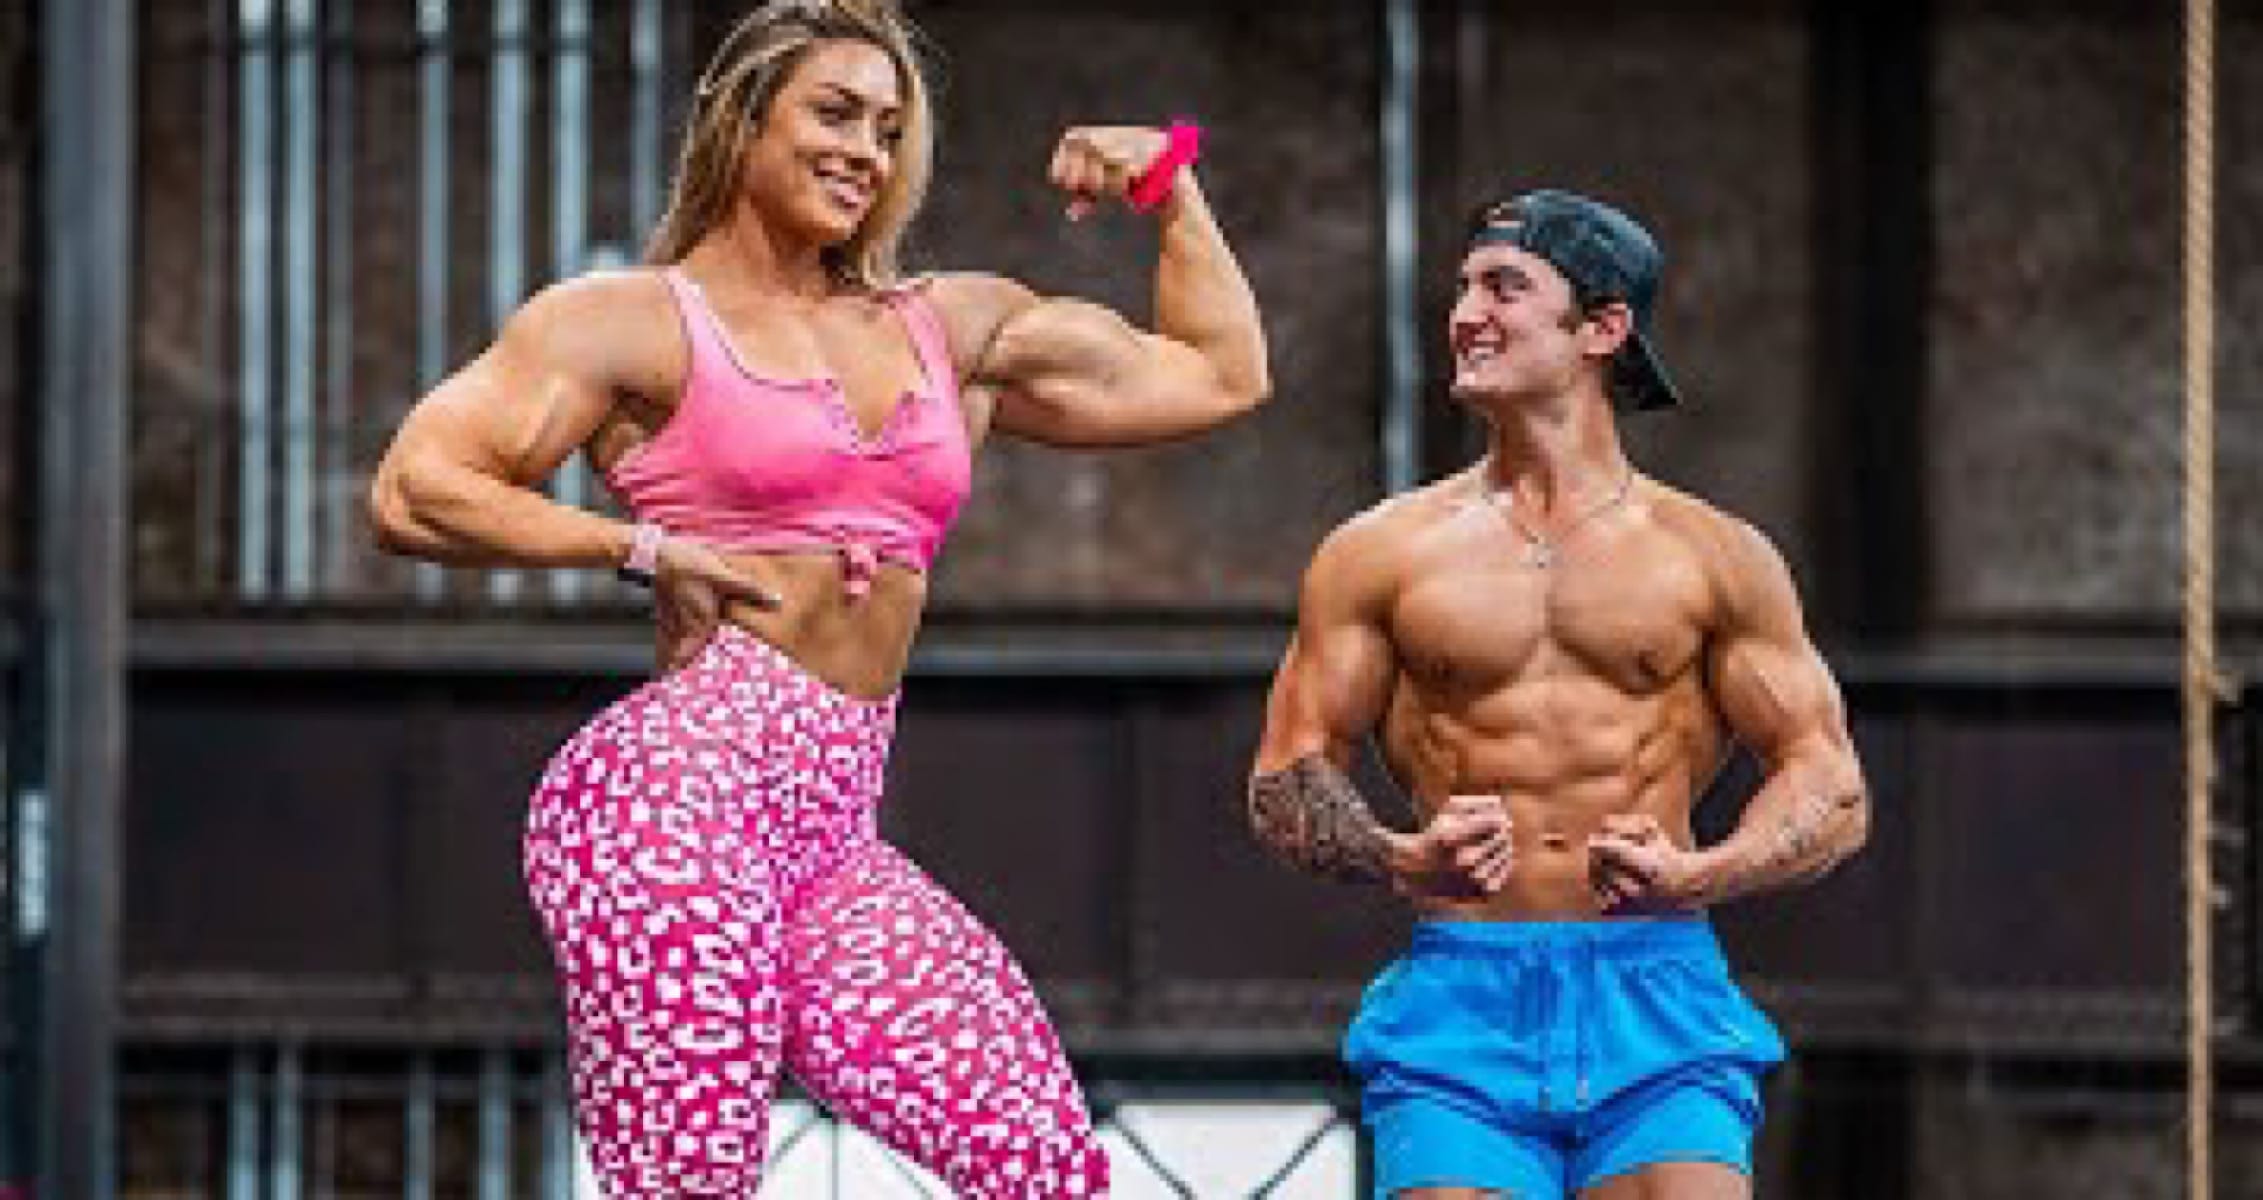 Jesse James West Gets Put Through Crushing Leg Day by Muscle Barbie Brittany Best